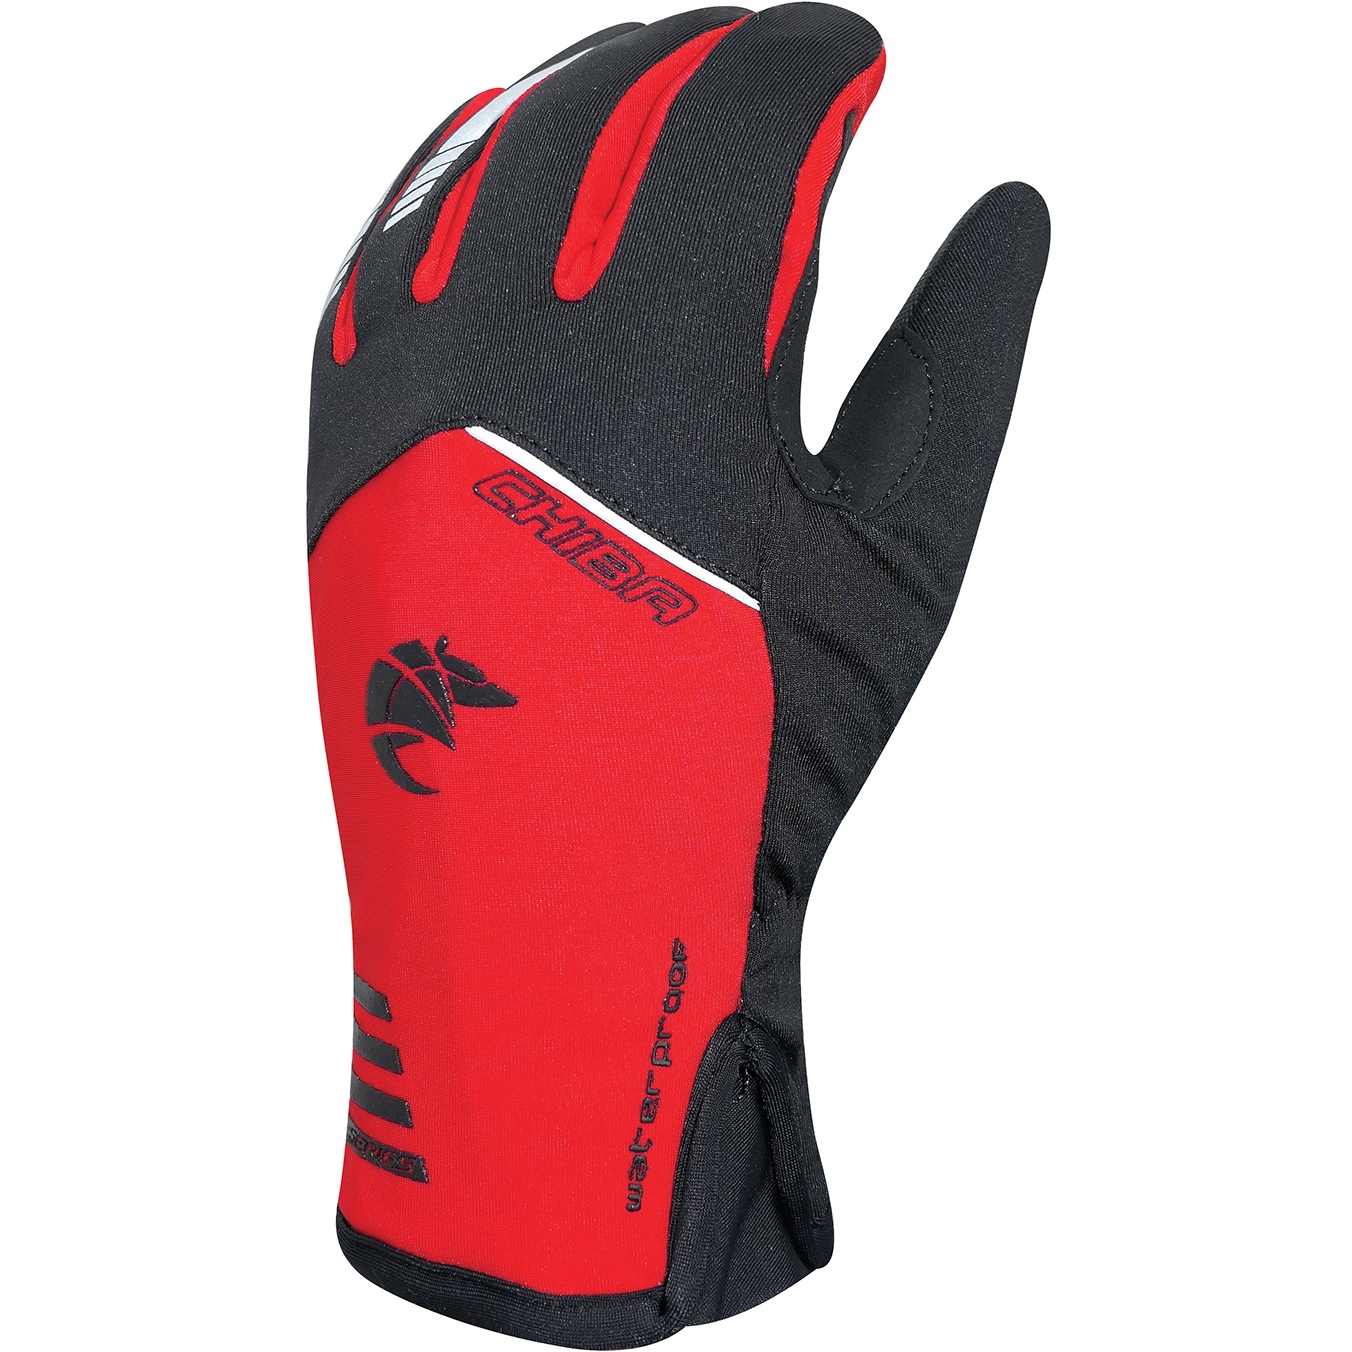 Image of Chiba 2nd Skin Cycling Gloves - red